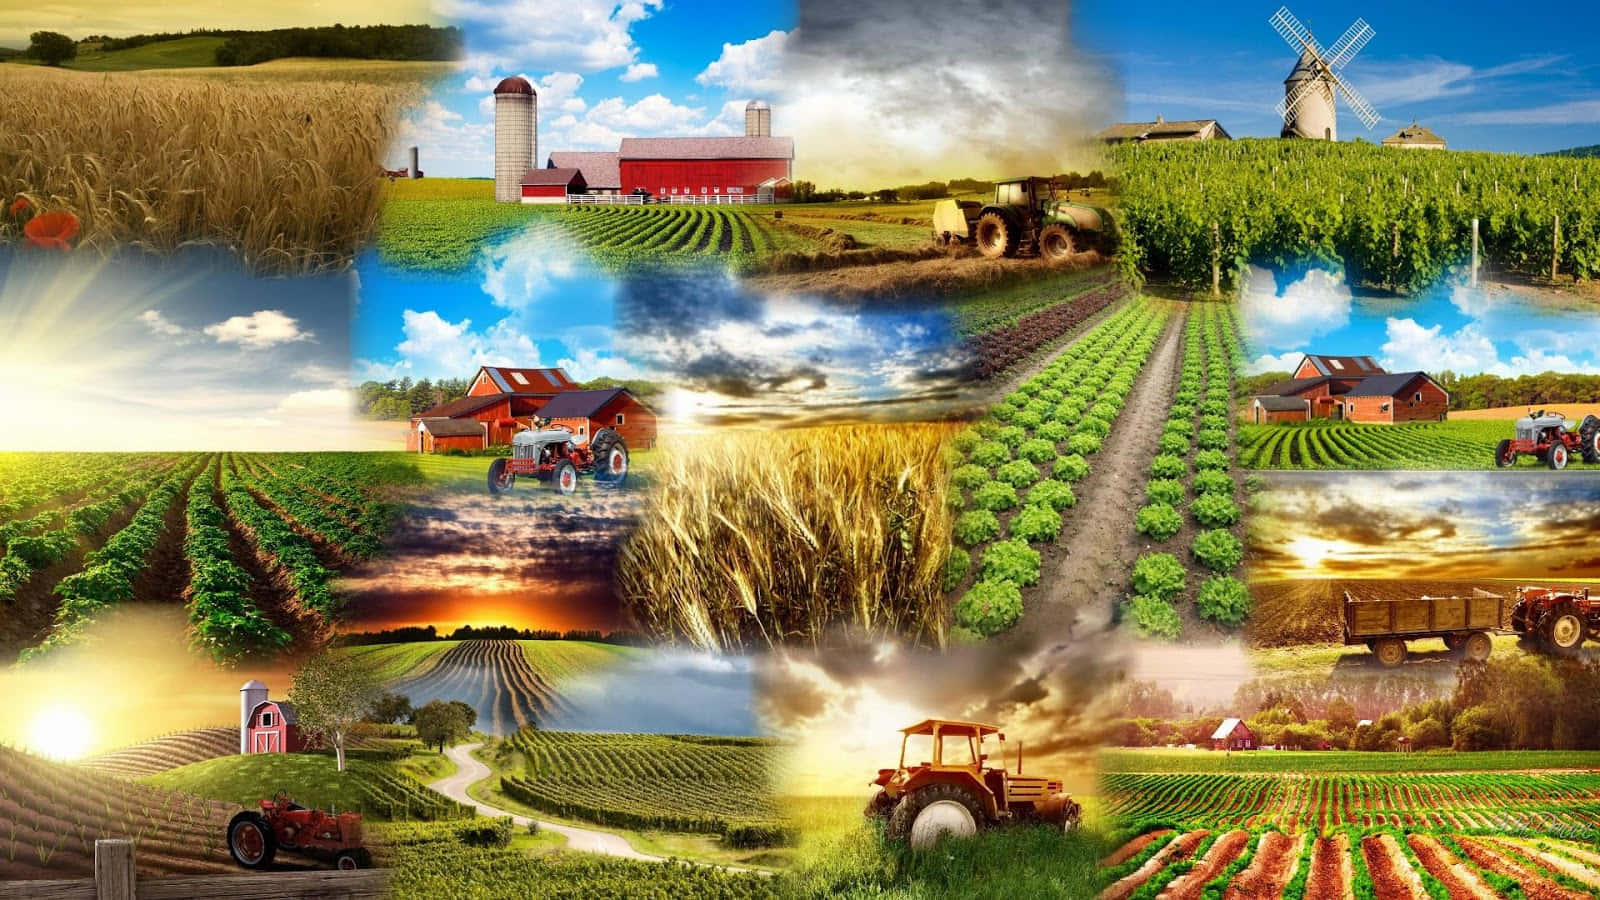 A Collage Of Pictures Of Farms And Farm Equipment